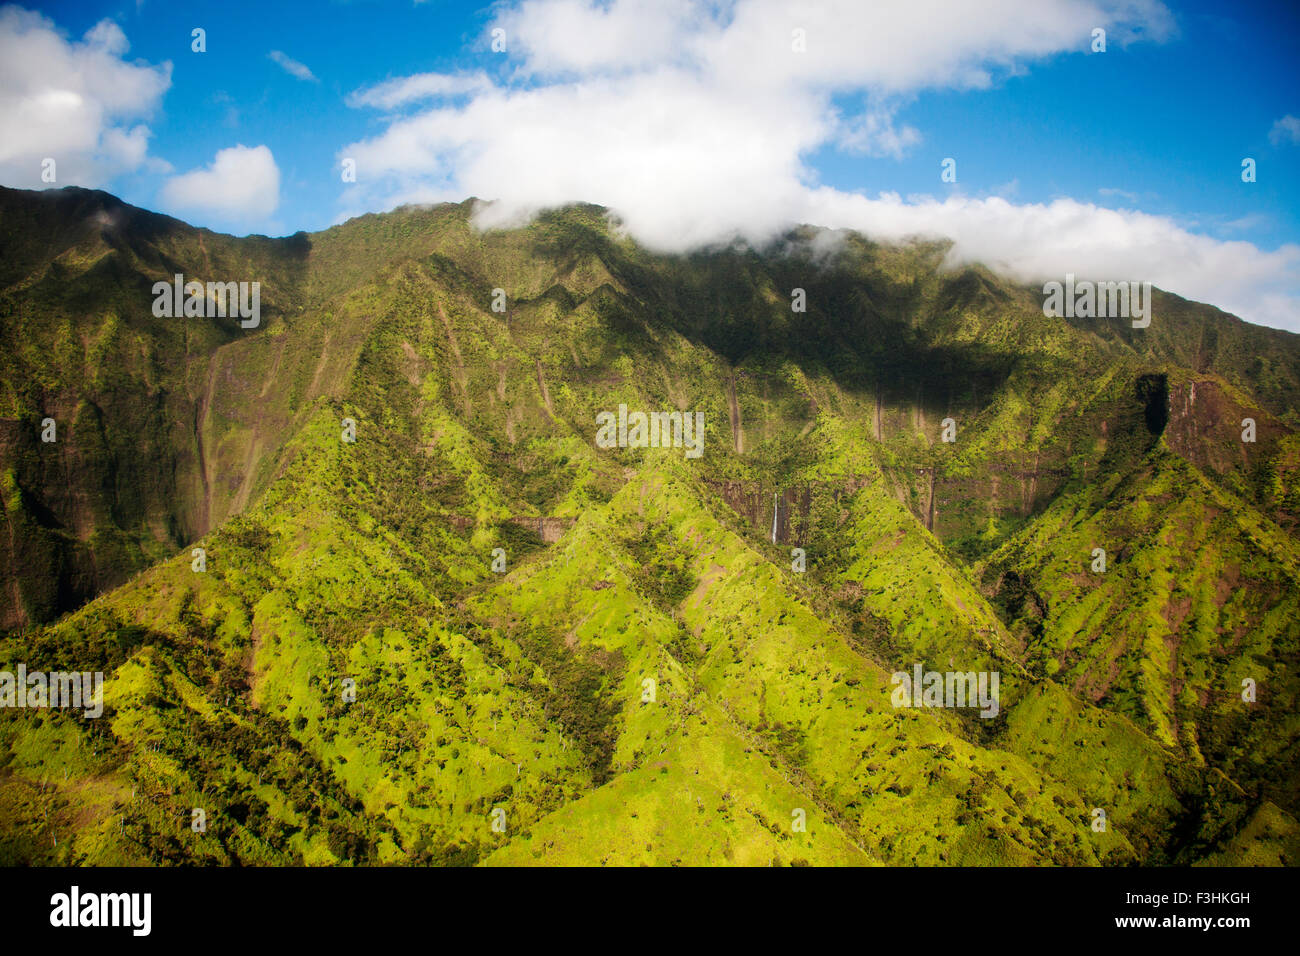 KAUAI, HAWAII, USA. Aerial image of lush green mountain slopes under soft clouds and blue sky. Stock Photo